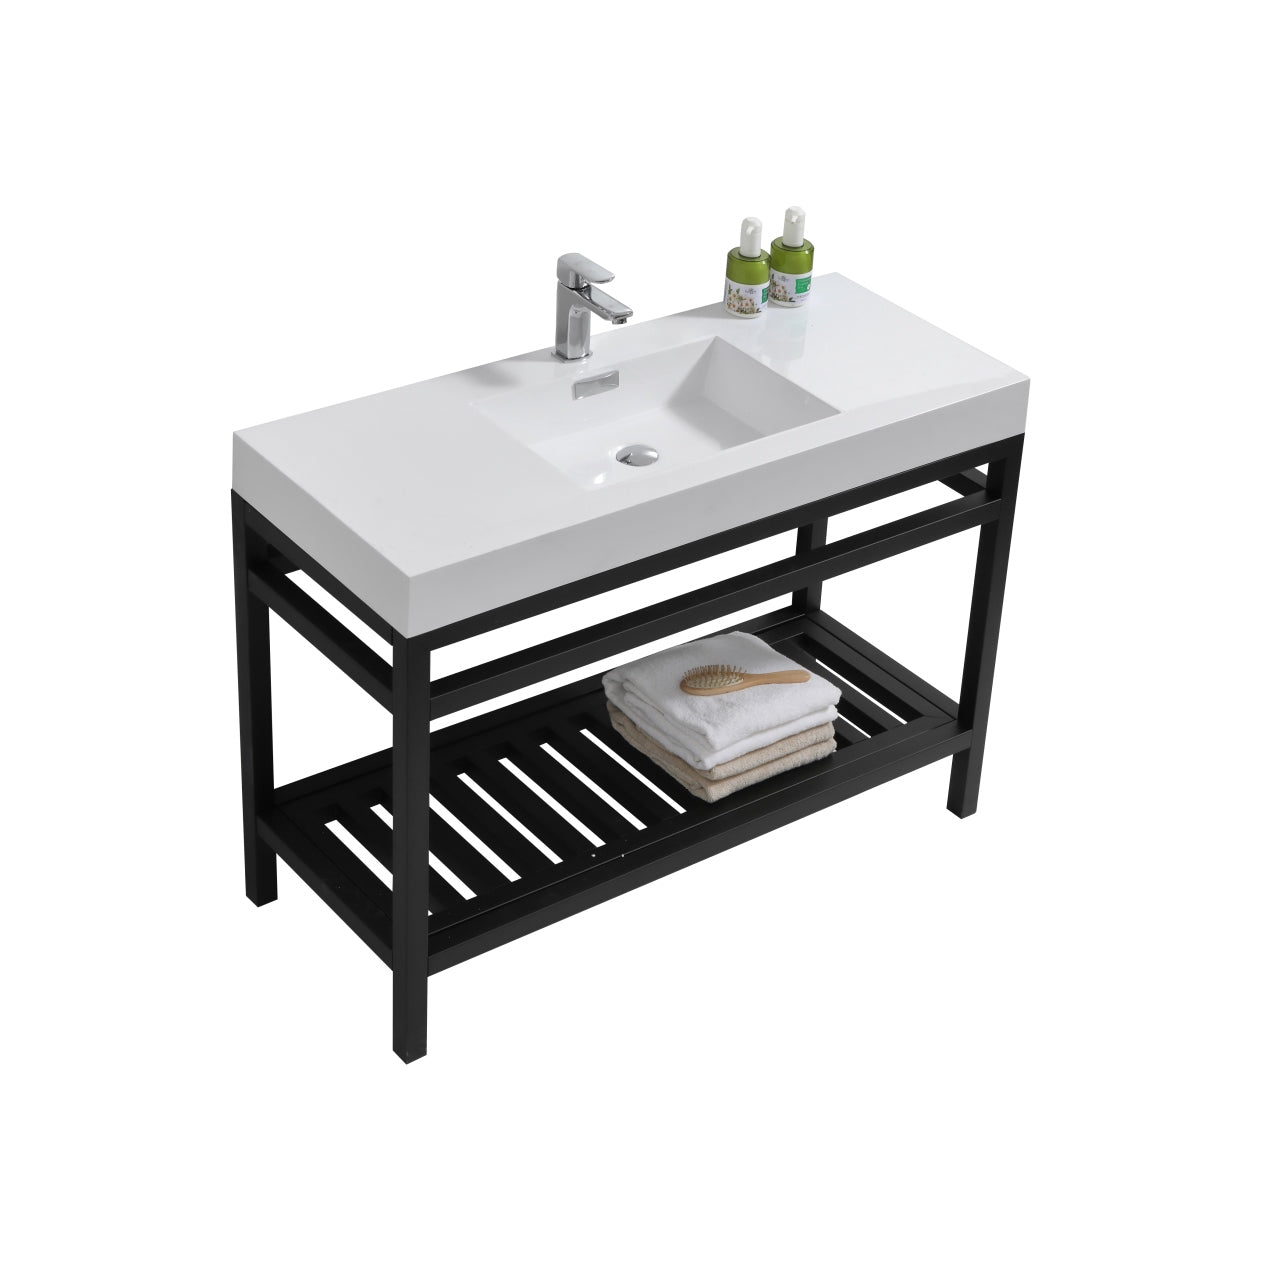 KUBEBATH Cisco AC48-BK 48" Single Bathroom Vanity in Matte Black with White Acrylic Composite, Integrated Sink, Angled View